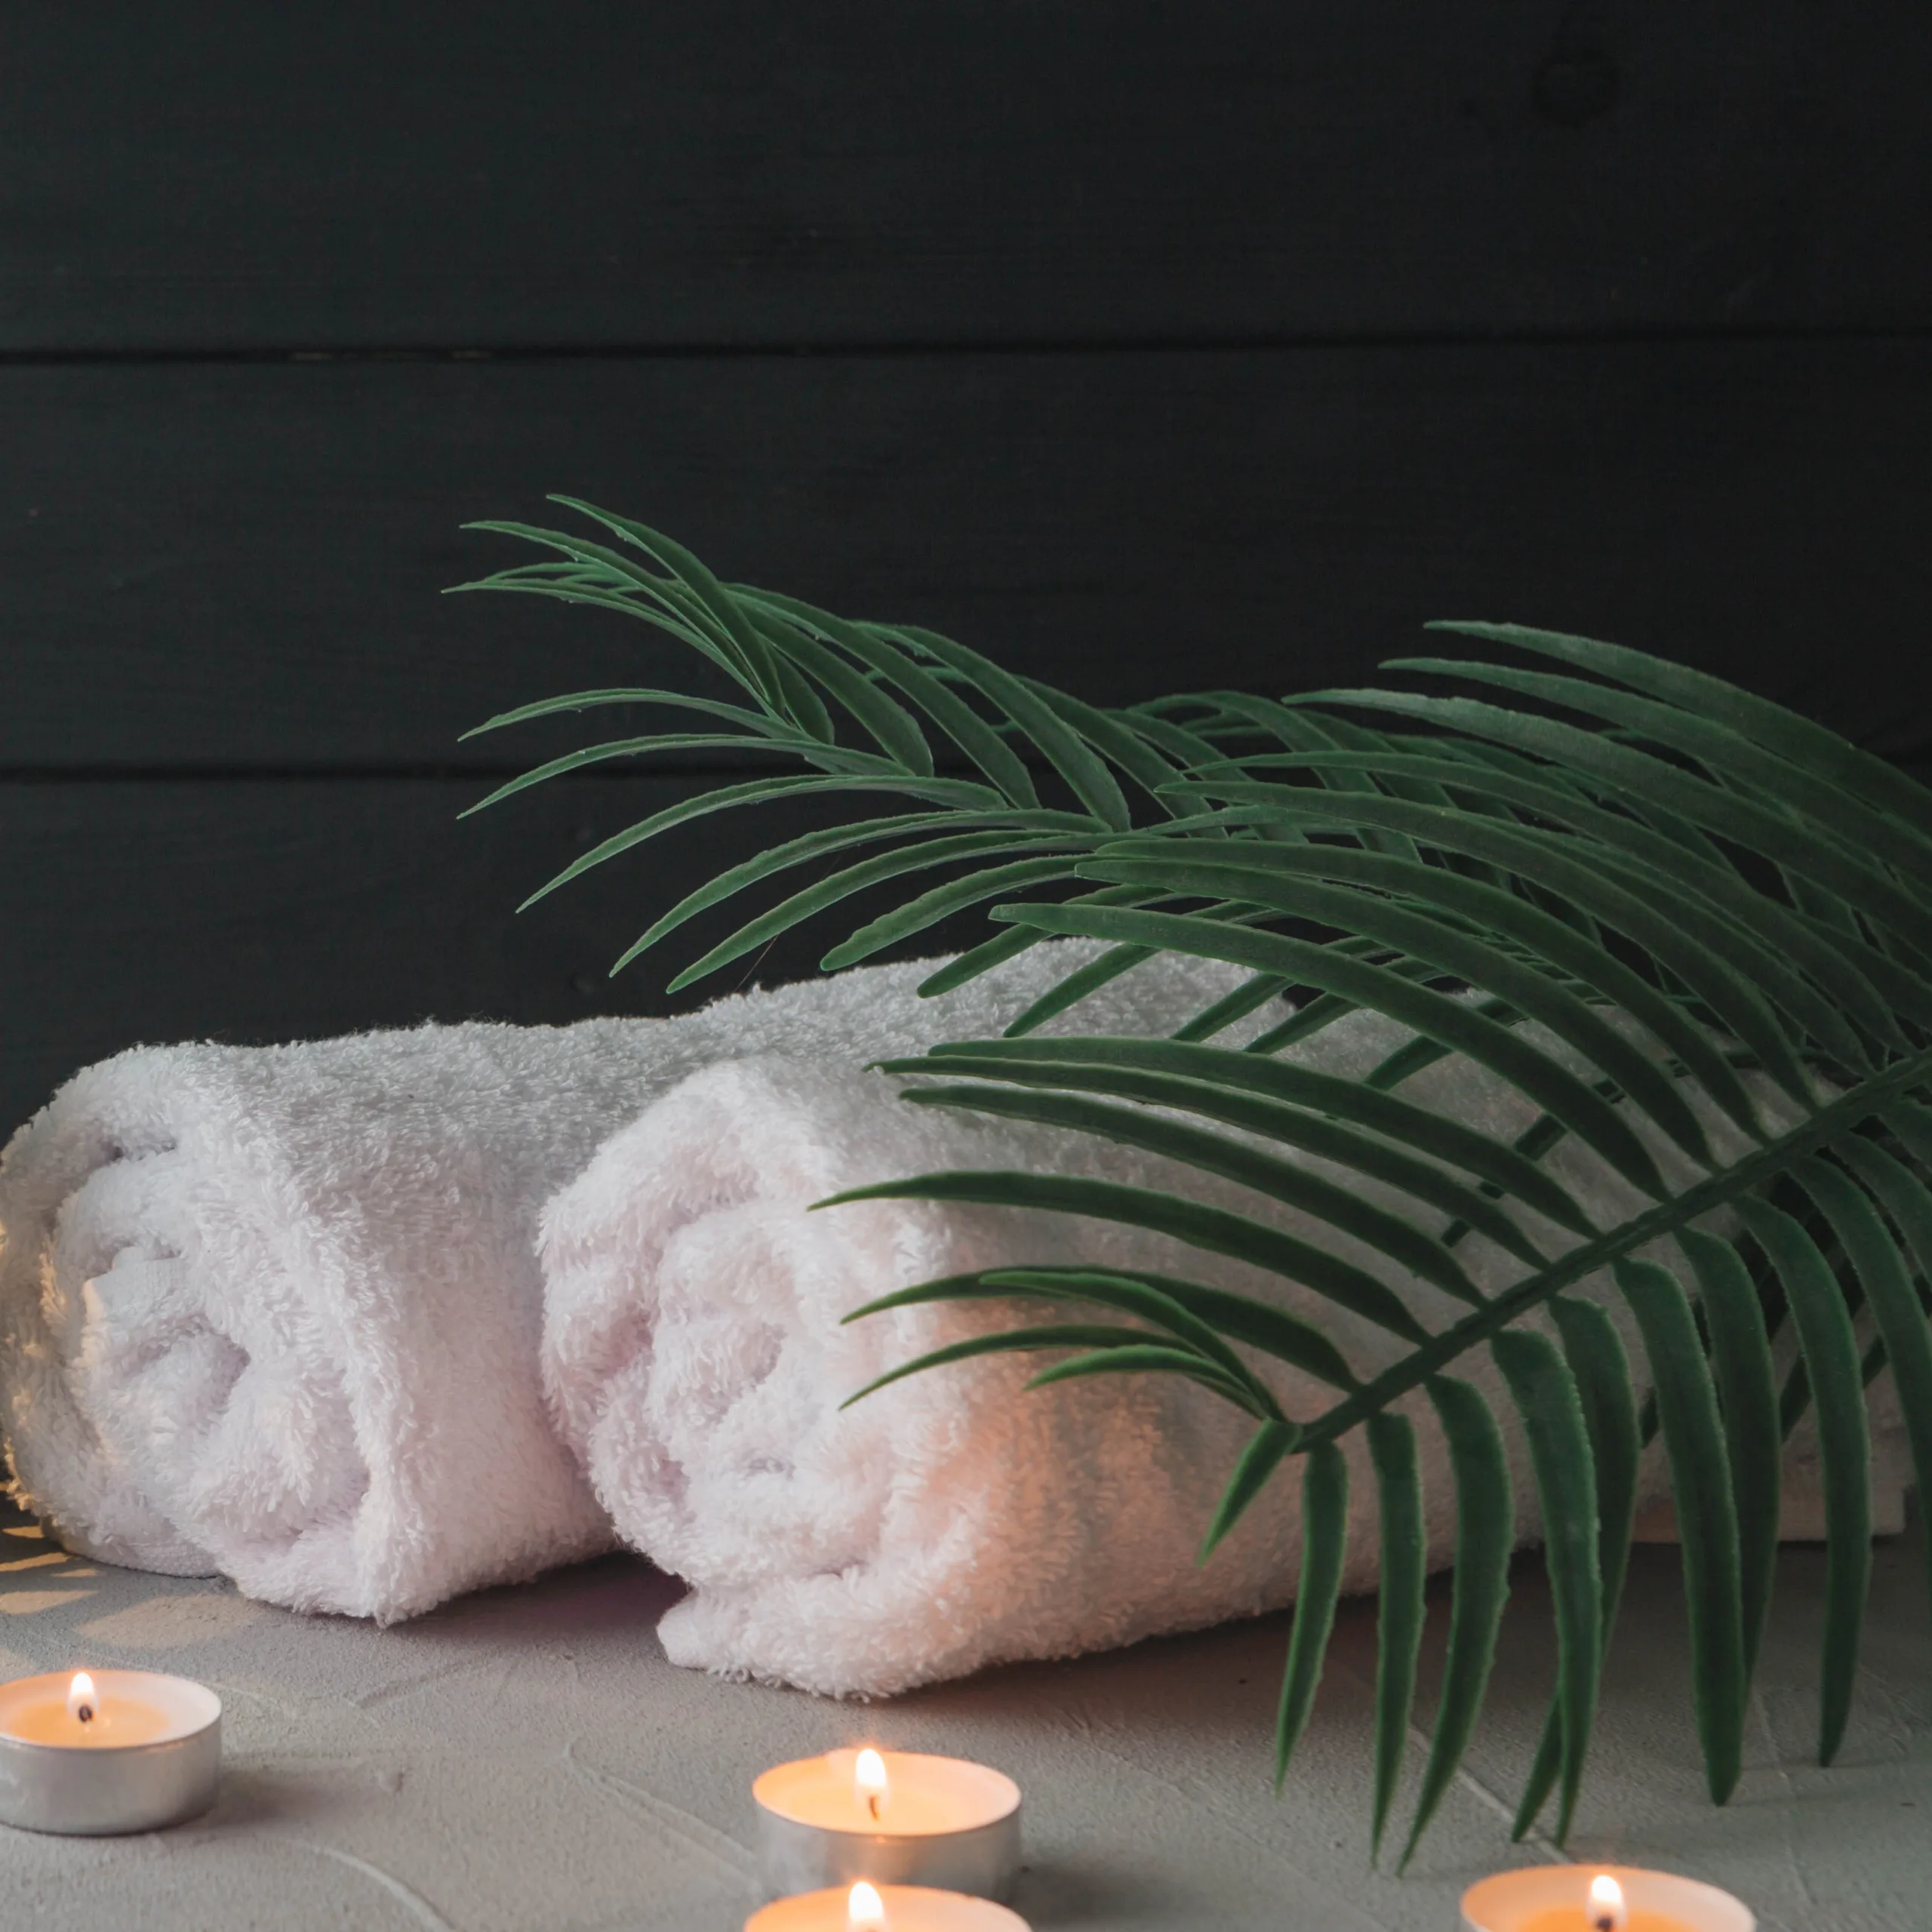 natural-elements-spa-with-candles